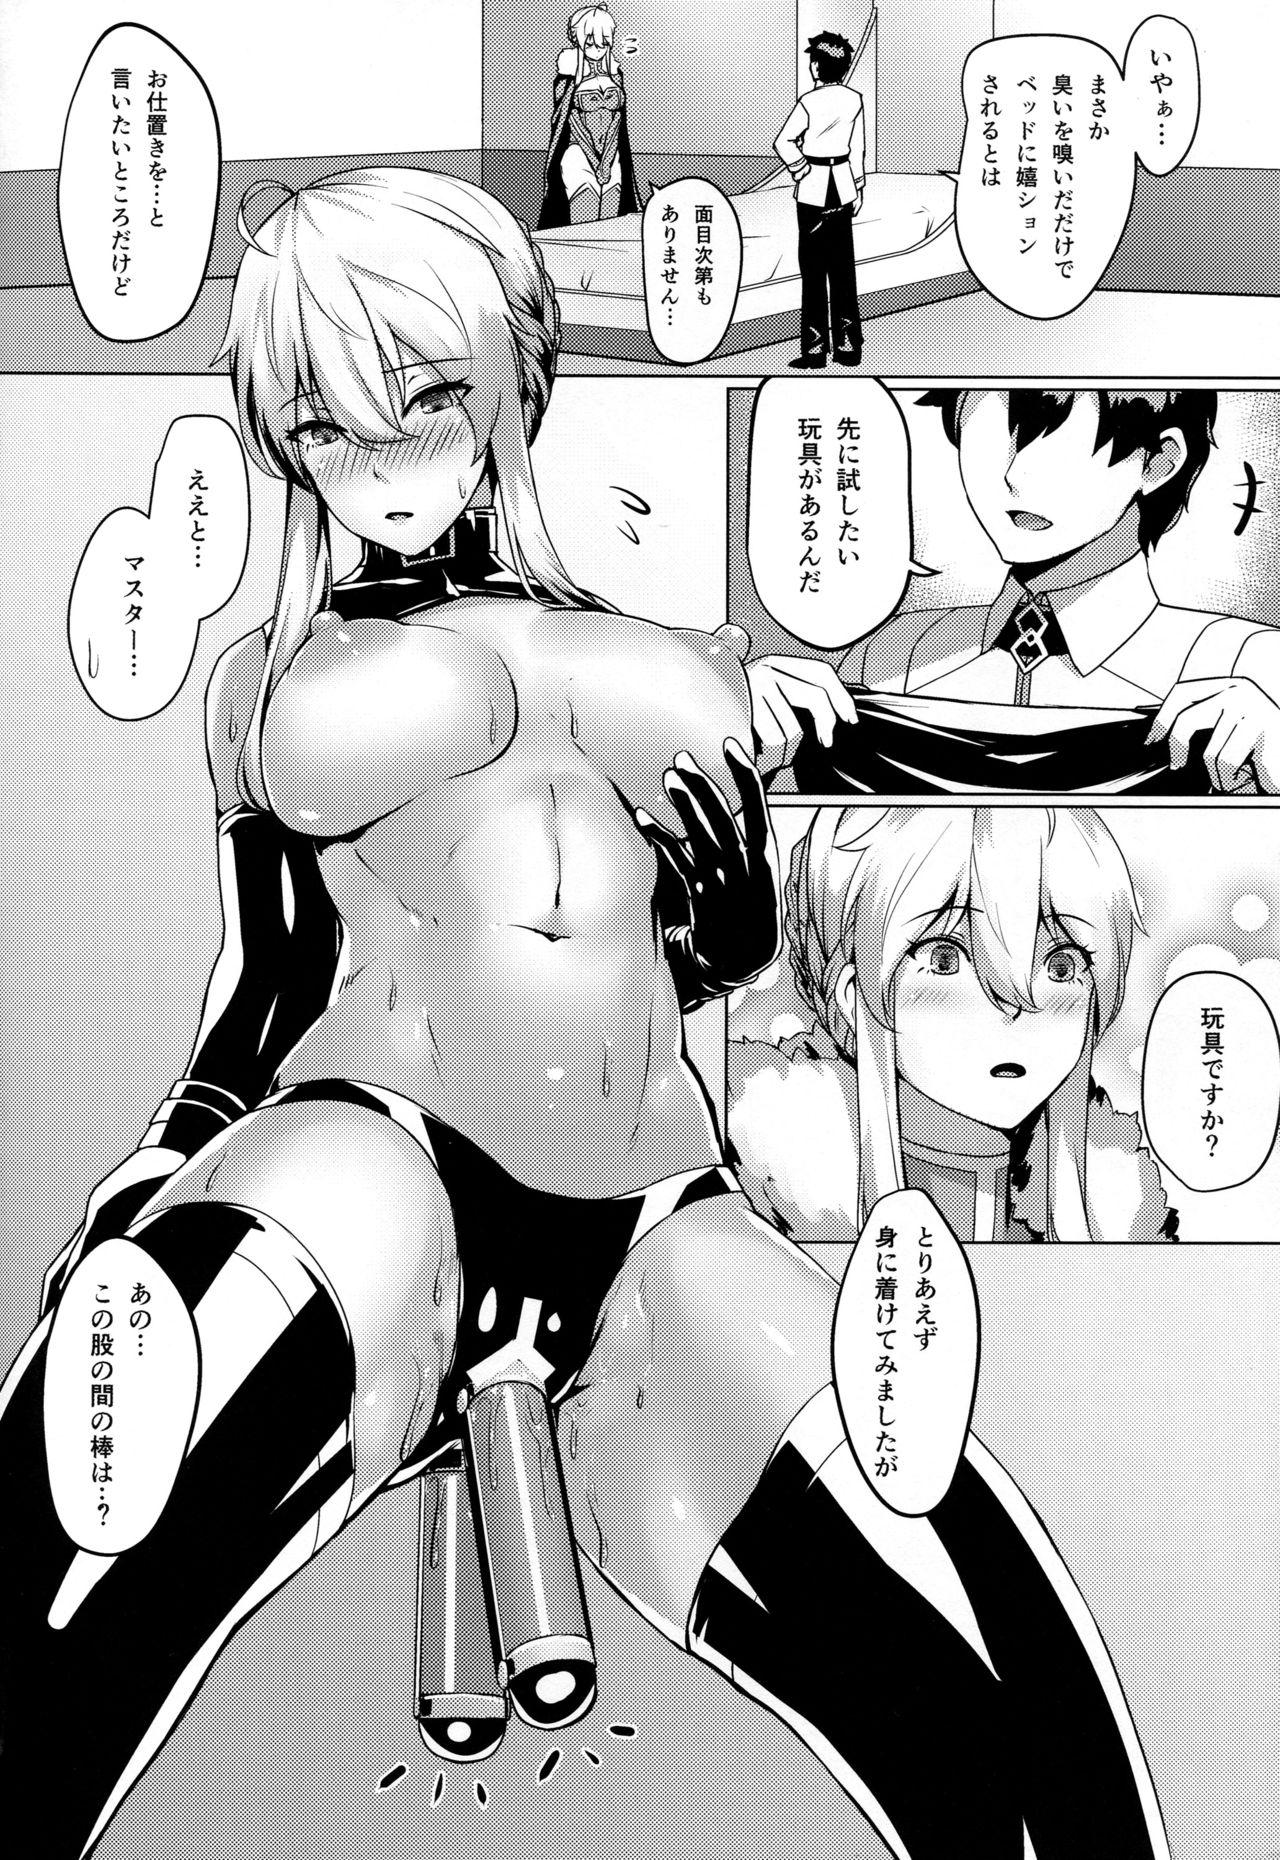 Gay Bukkakeboys Like Attracts Like - Fate grand order Free Rough Porn - Page 7